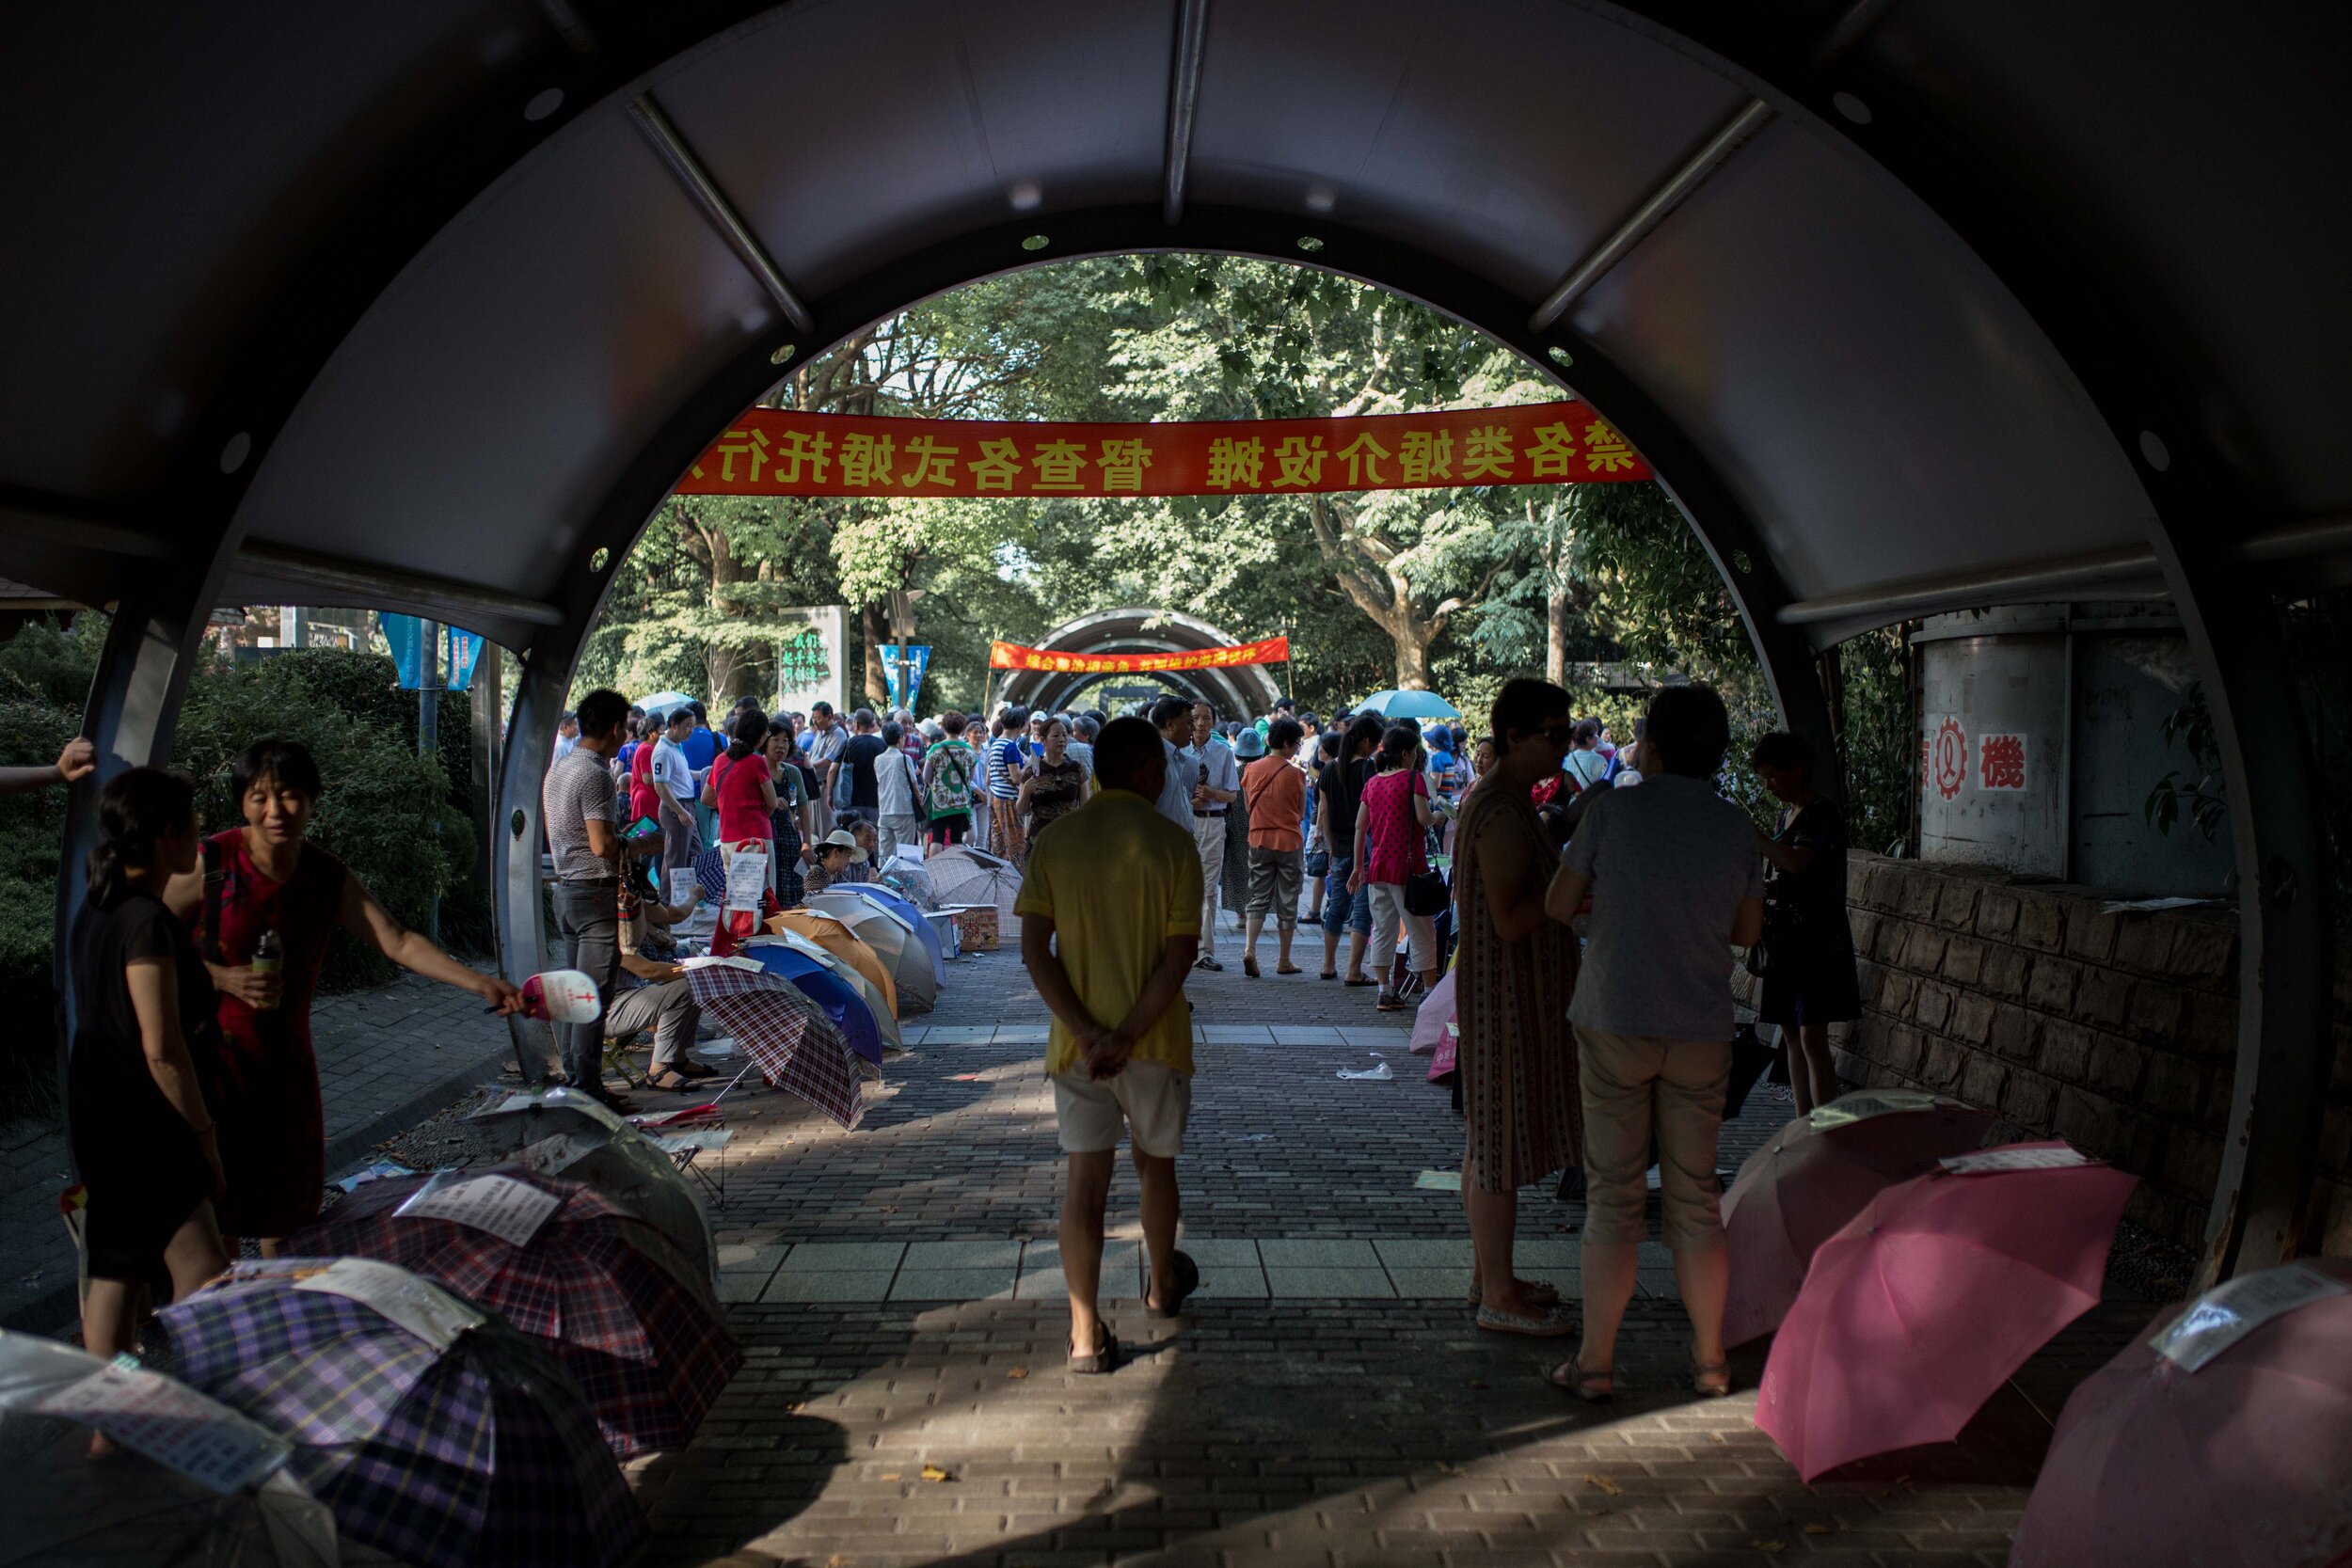  On weekends in People’s Park in Shanghai, hundreds of eager parents meet at the “Marriage Market” as it know among locals, holding paper ads or pasting them to umbrellas, trading contact information, hoping to find a match for their children. 